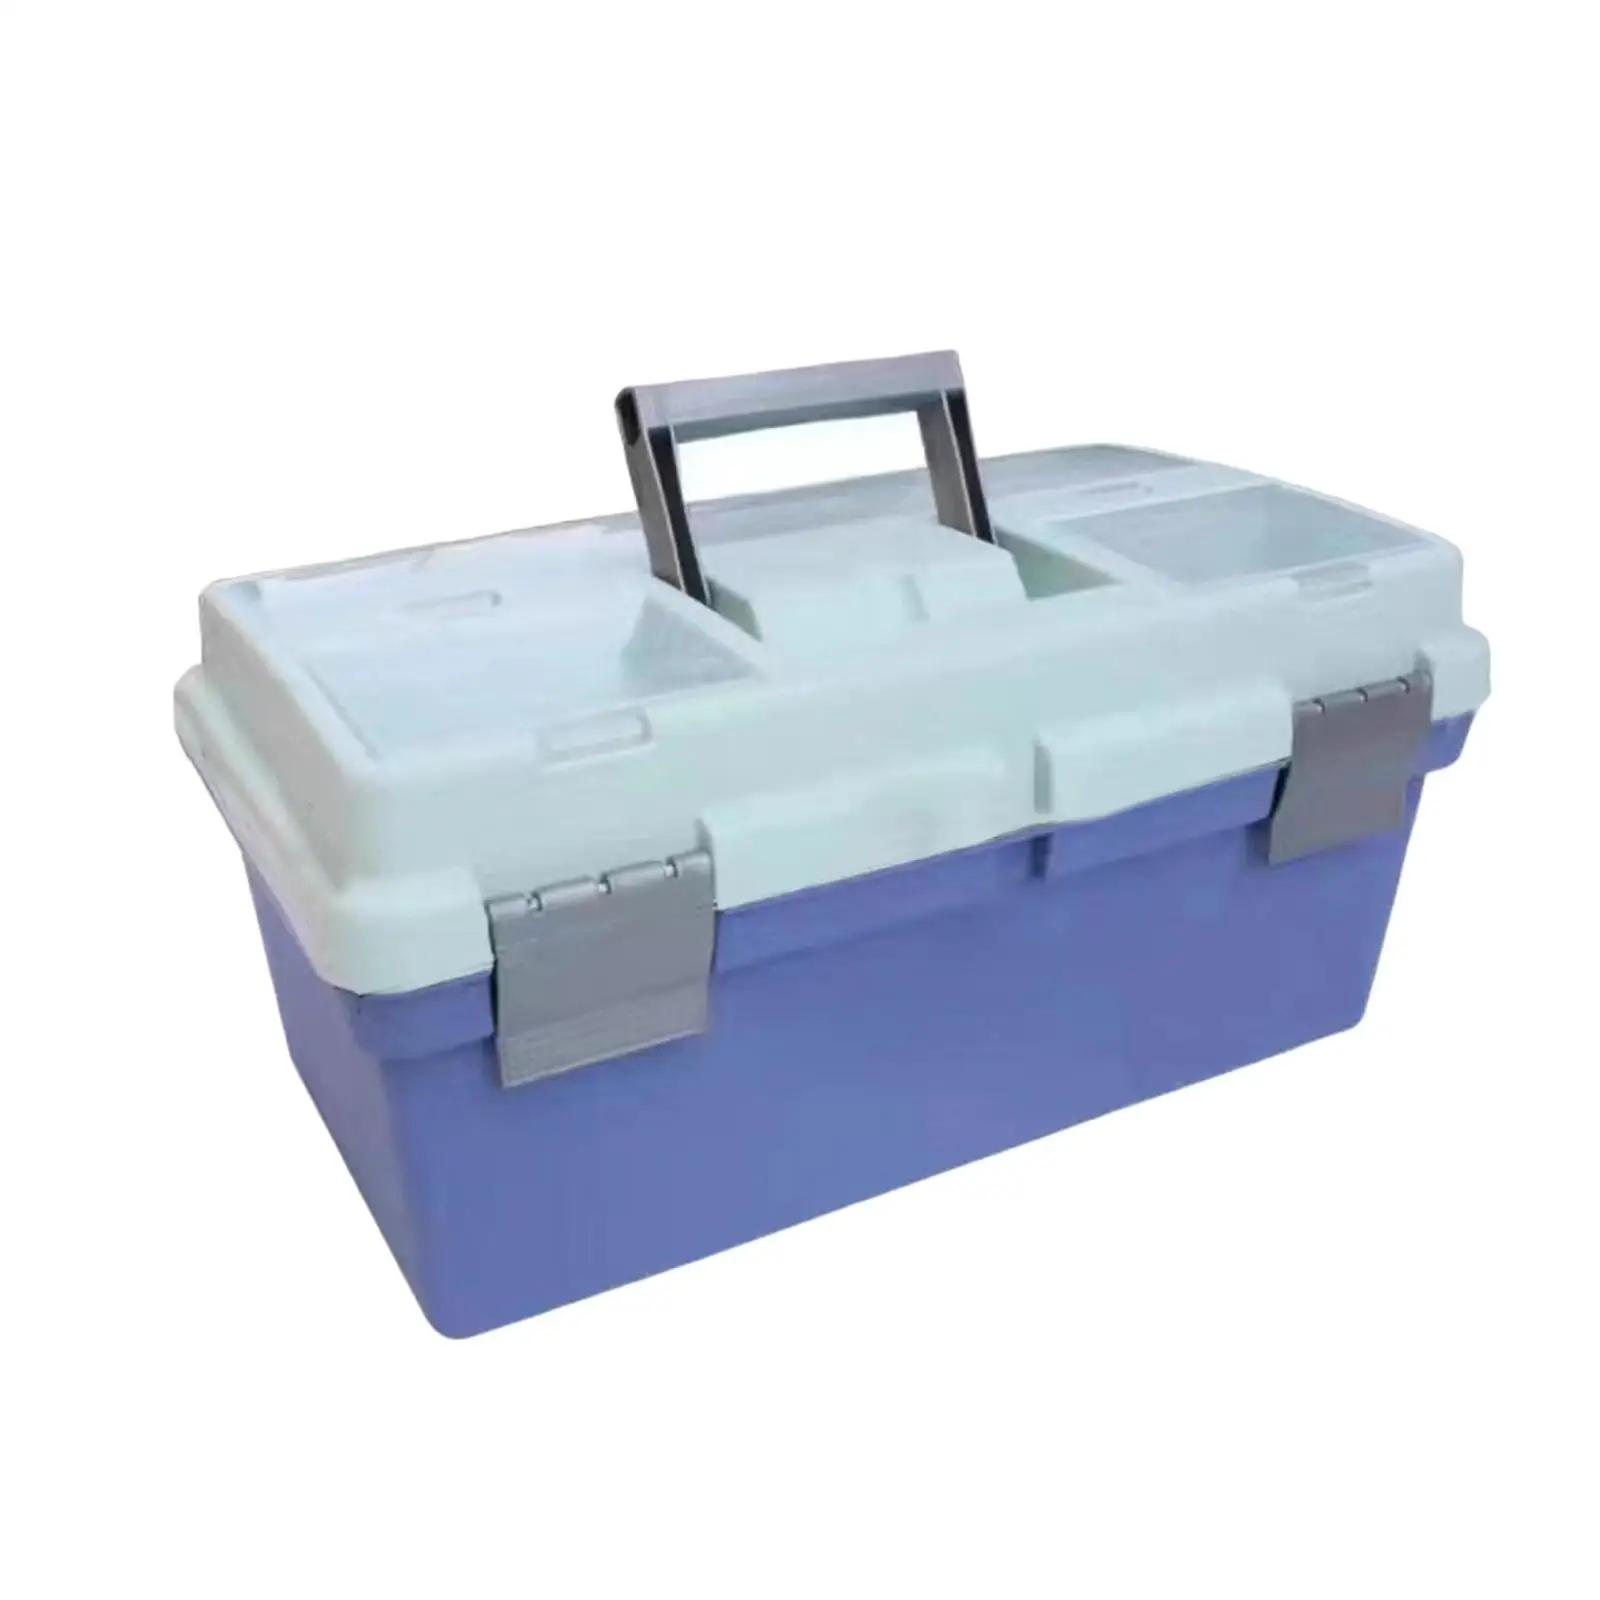 Multipurpose Storage Box Organizer Removable Tray Toolbox 2 Tray 16inch Portable Accessories Storage Box for Office car